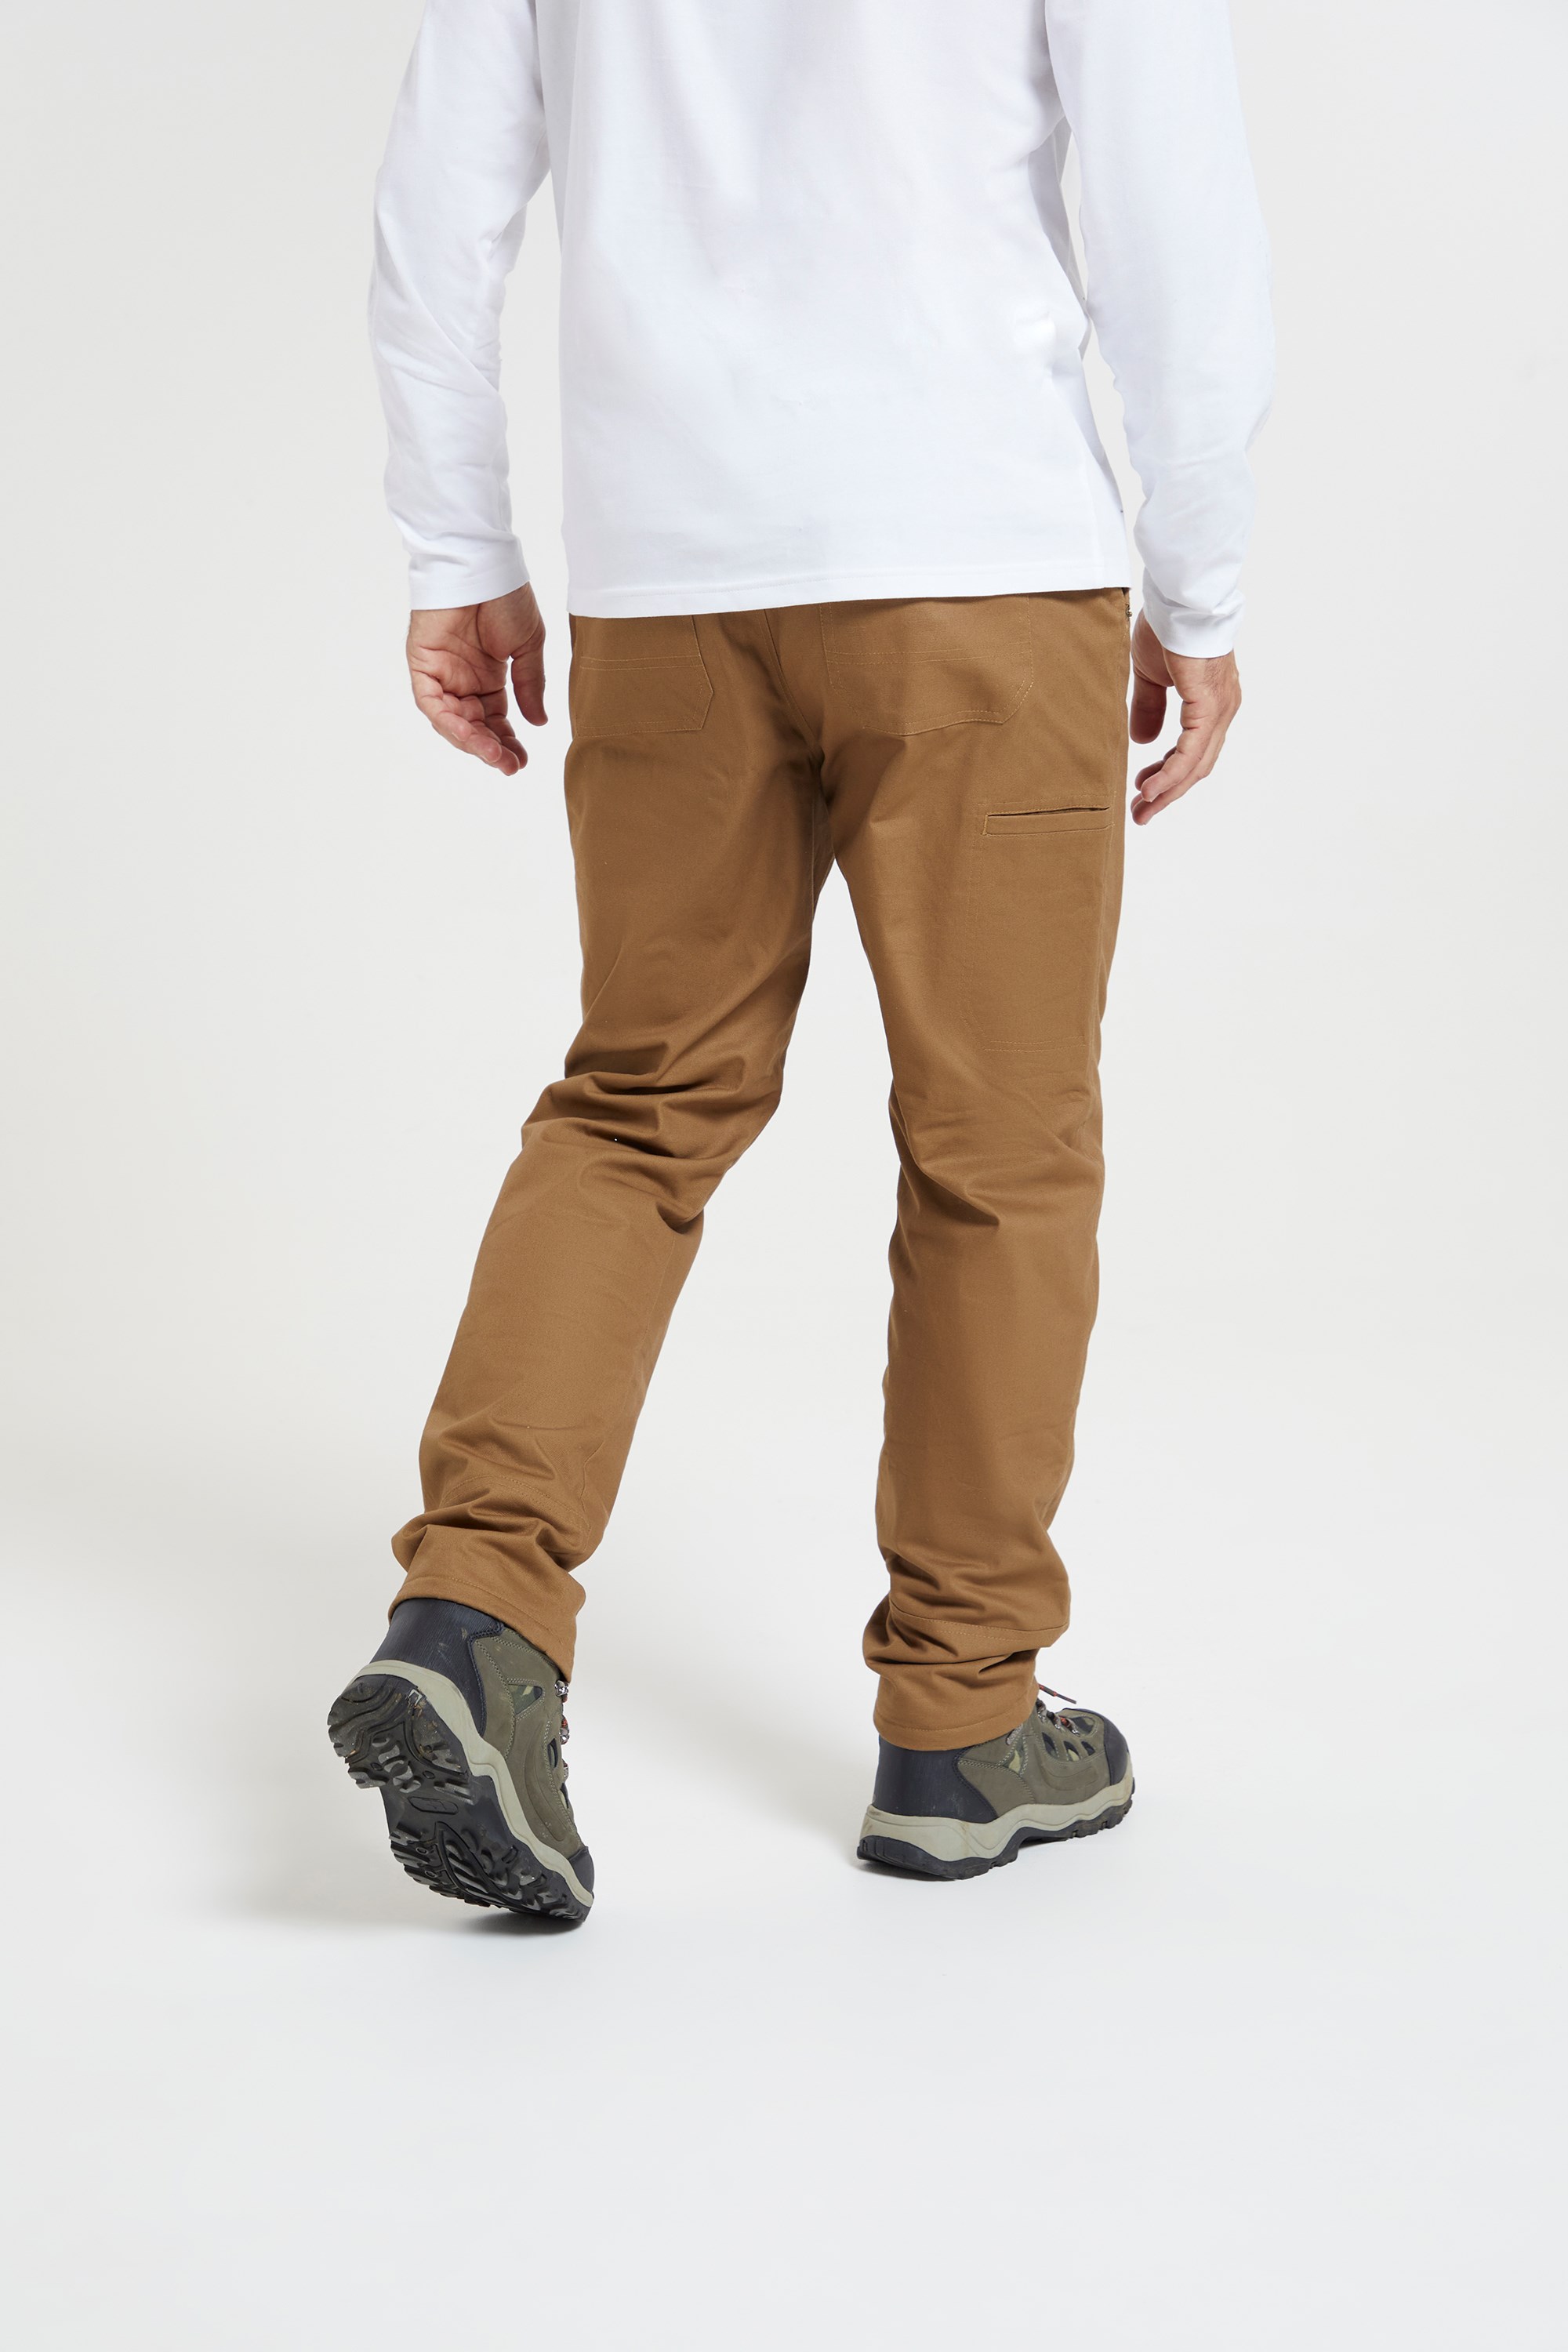 MENS FLEECE LINED Thermal Trousers Elasticated Waist Winter Casual Cargo  Pants 1699  PicClick UK